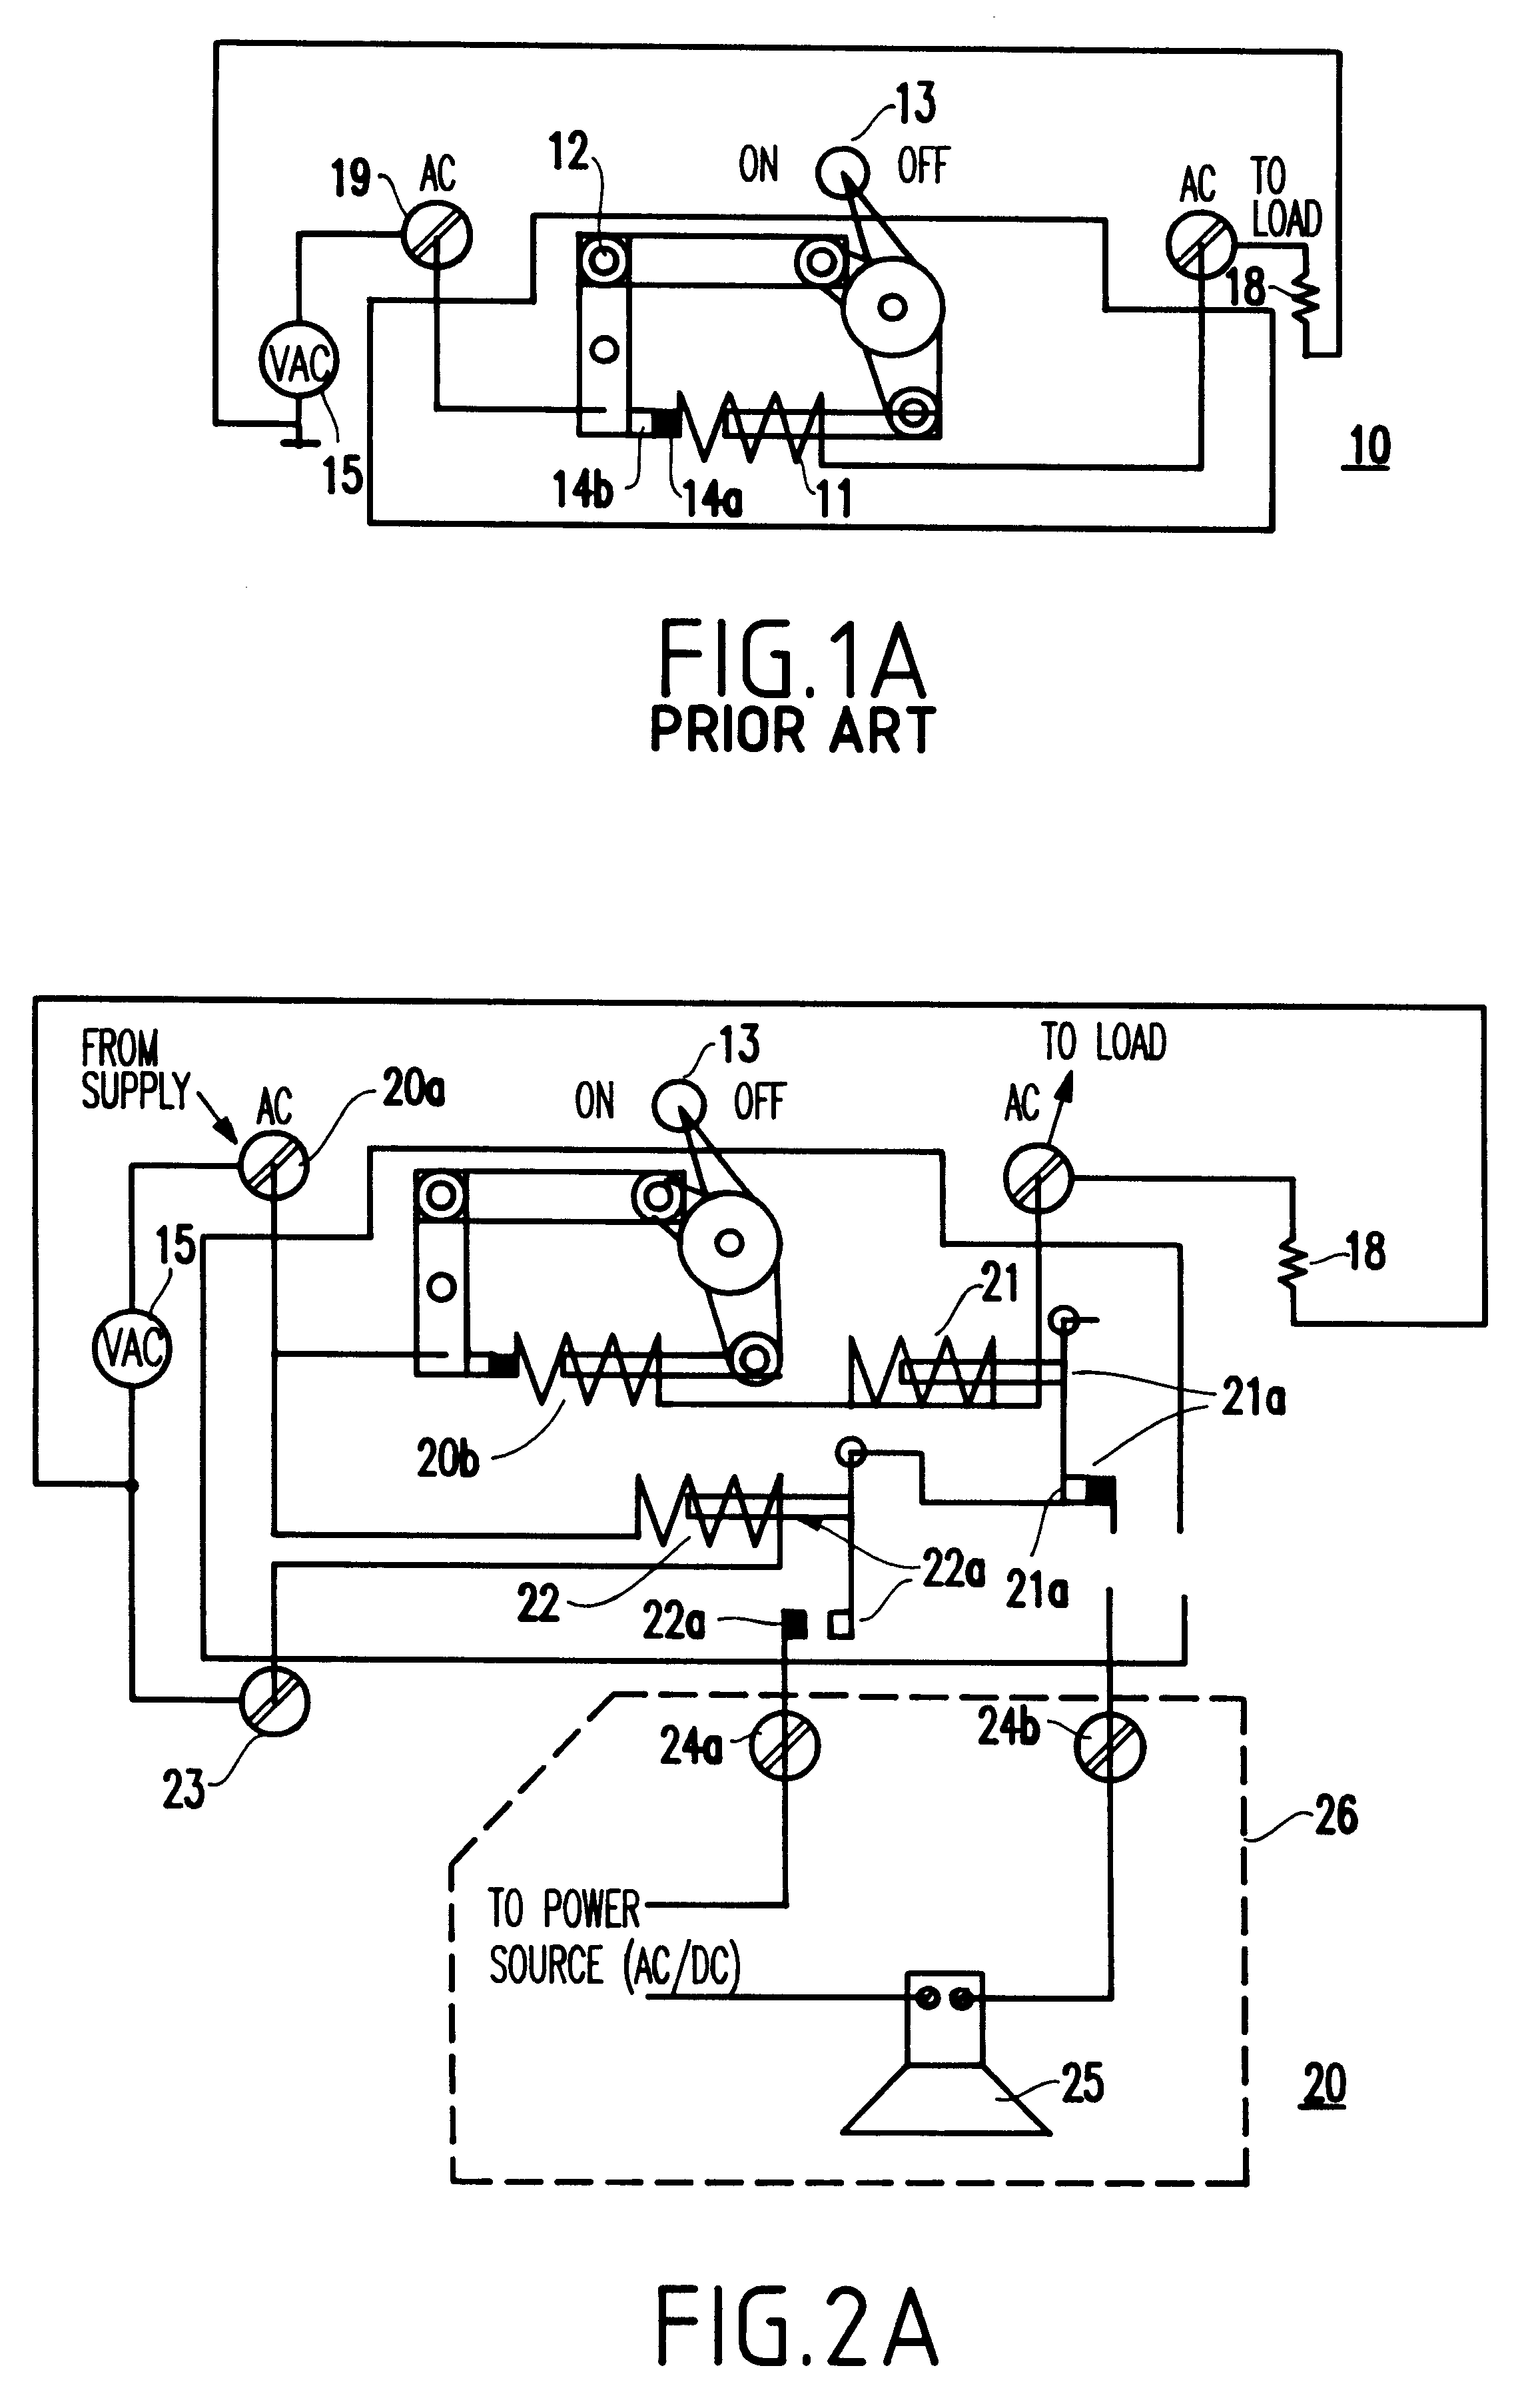 Circuit continuity detection system and method